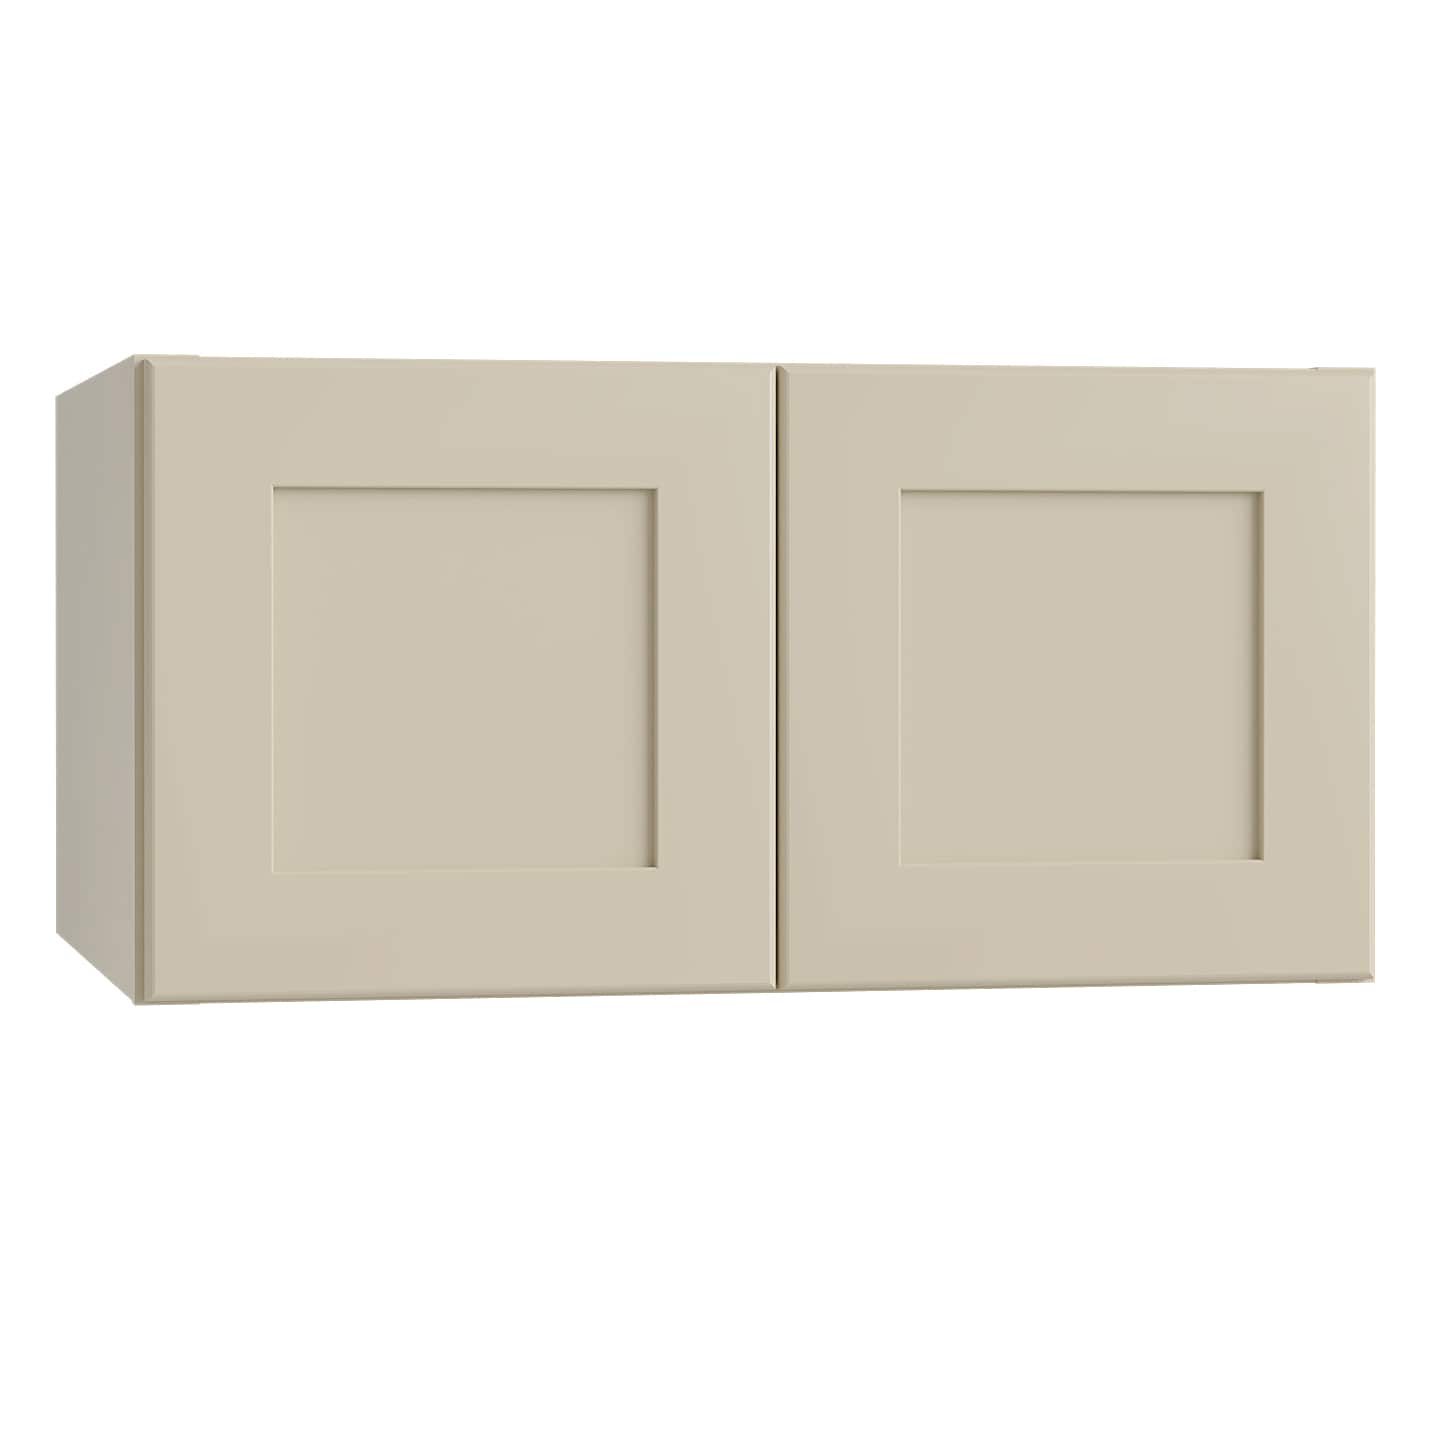 Luxxe Cabinetry 30-in W x 18-in H x 24-in D Norfolk Blended Cream Painted Door Wall Fully Assembled Semi-custom Cabinet in Off-White | W302418-NBC